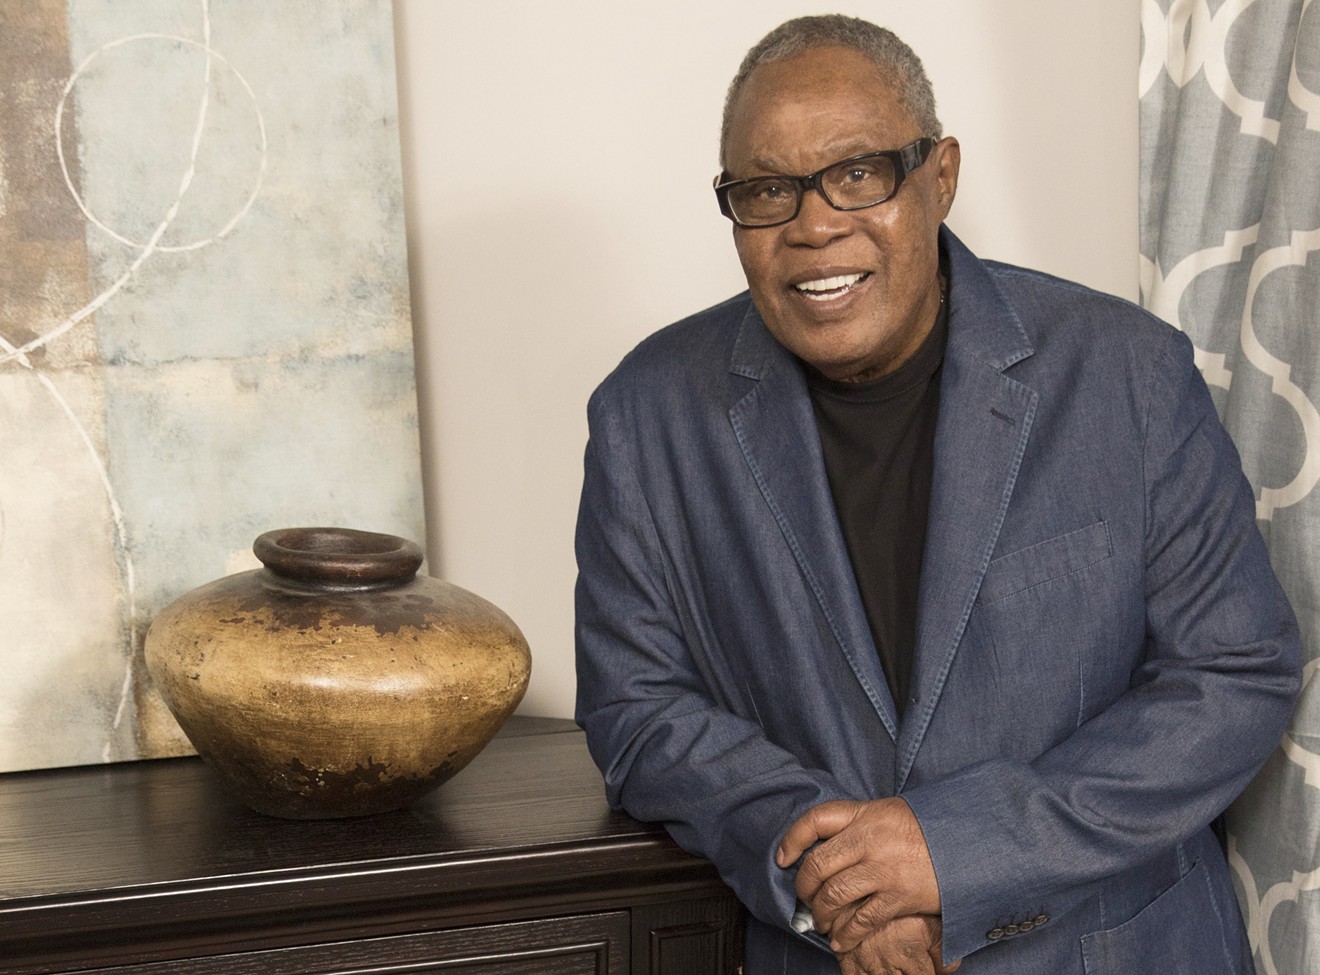 Sam Moore is a soul journeyman who made Arizona his home.